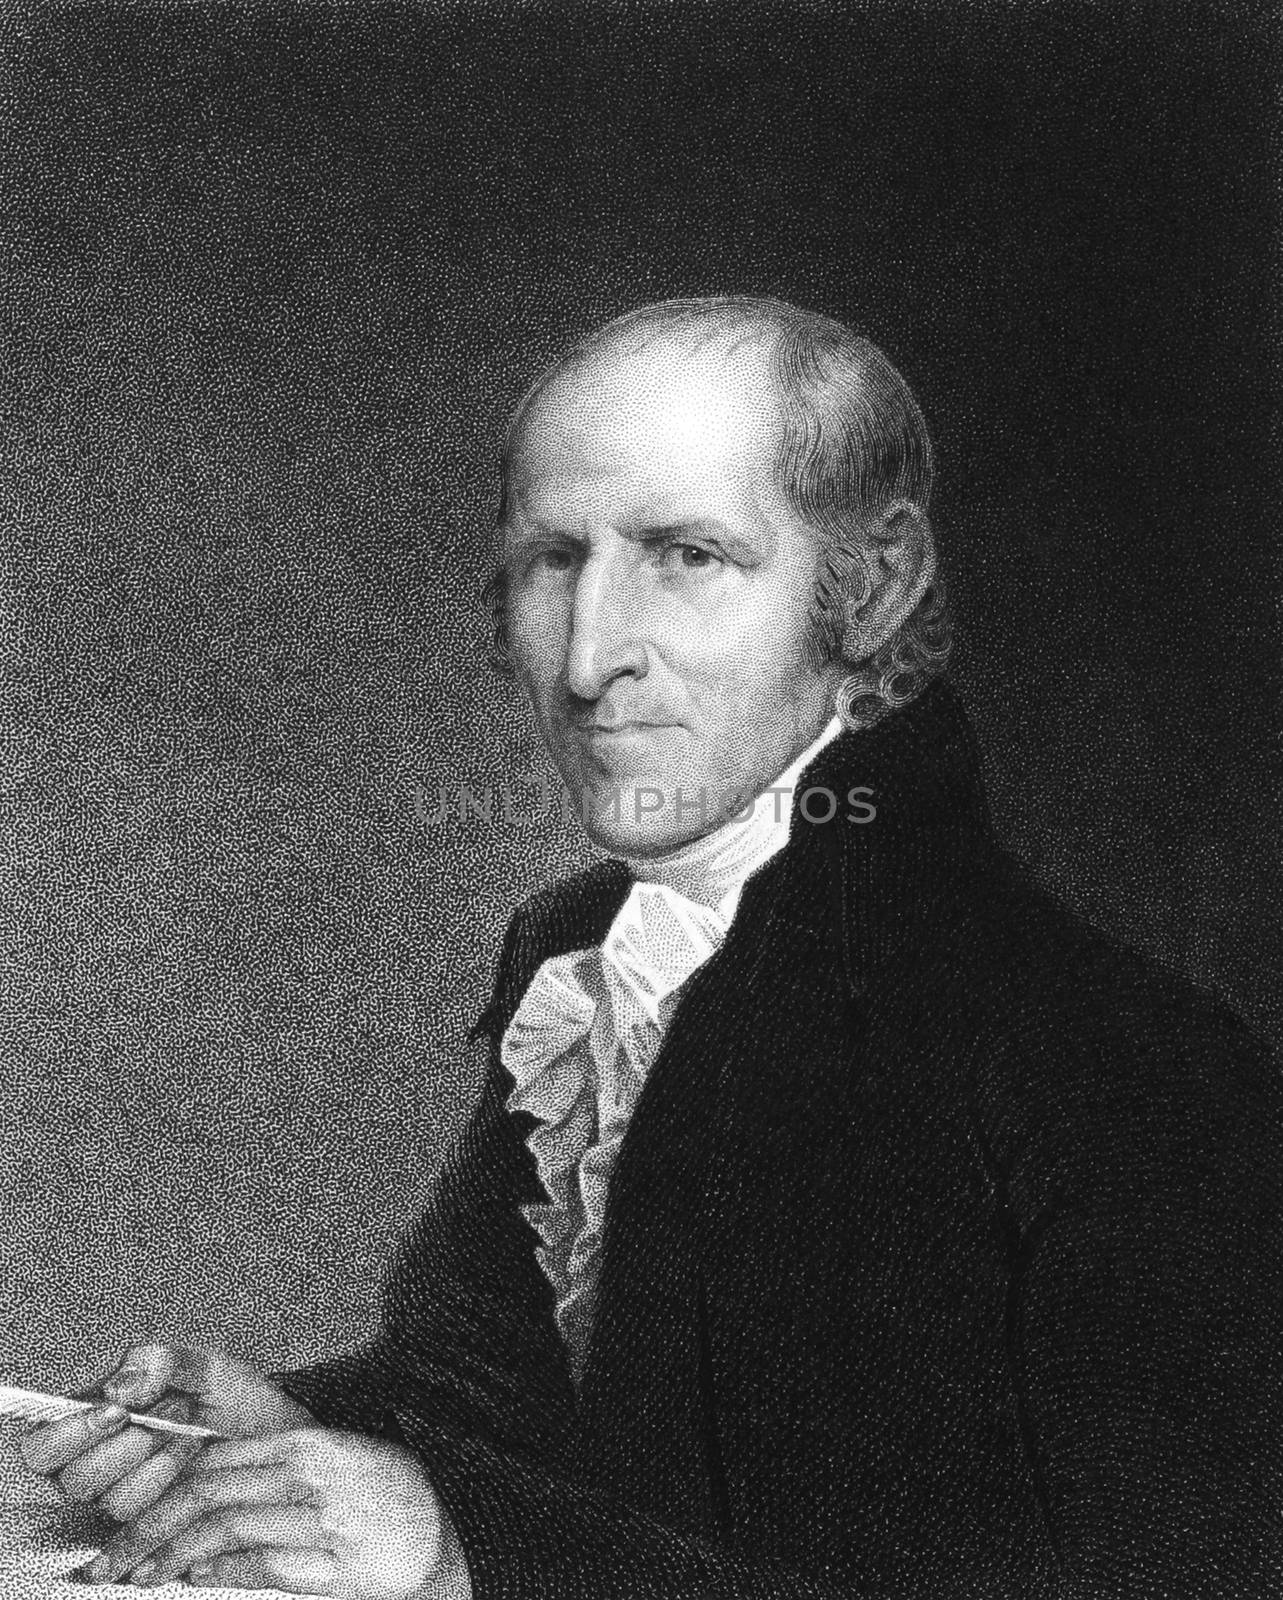 Timothy Pickering (1745-1829) on engraving from 1834. Politician from Massachusetts. Engraved by T.B.Welch and published in ''National Portrait Gallery of Distinguished Americans'',USA,1834